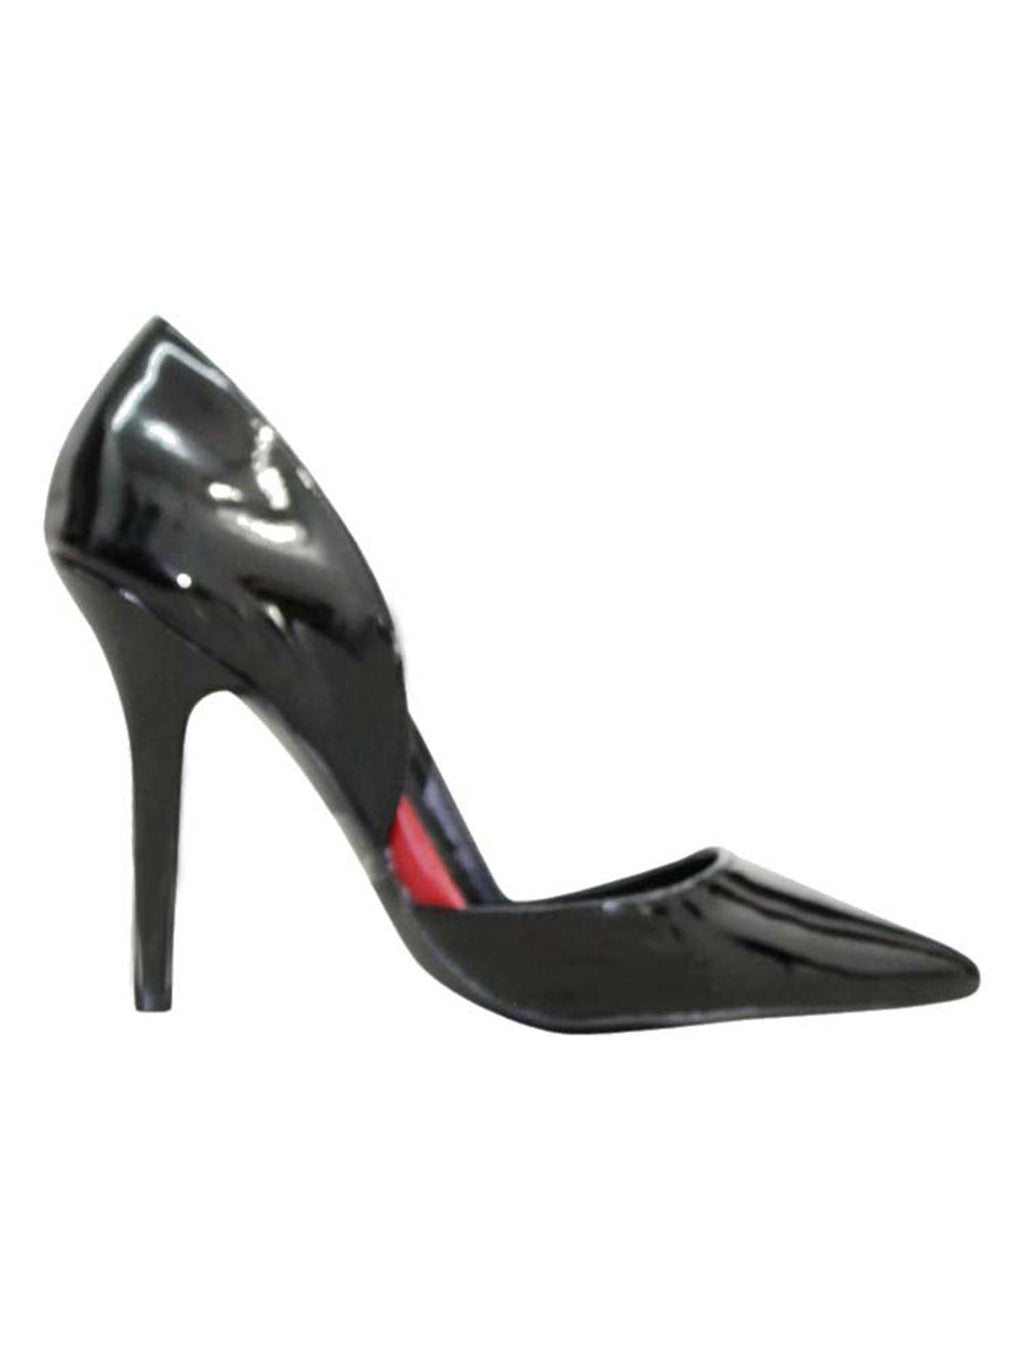 Patent Leather Stiletto Womens High Heel Pumps